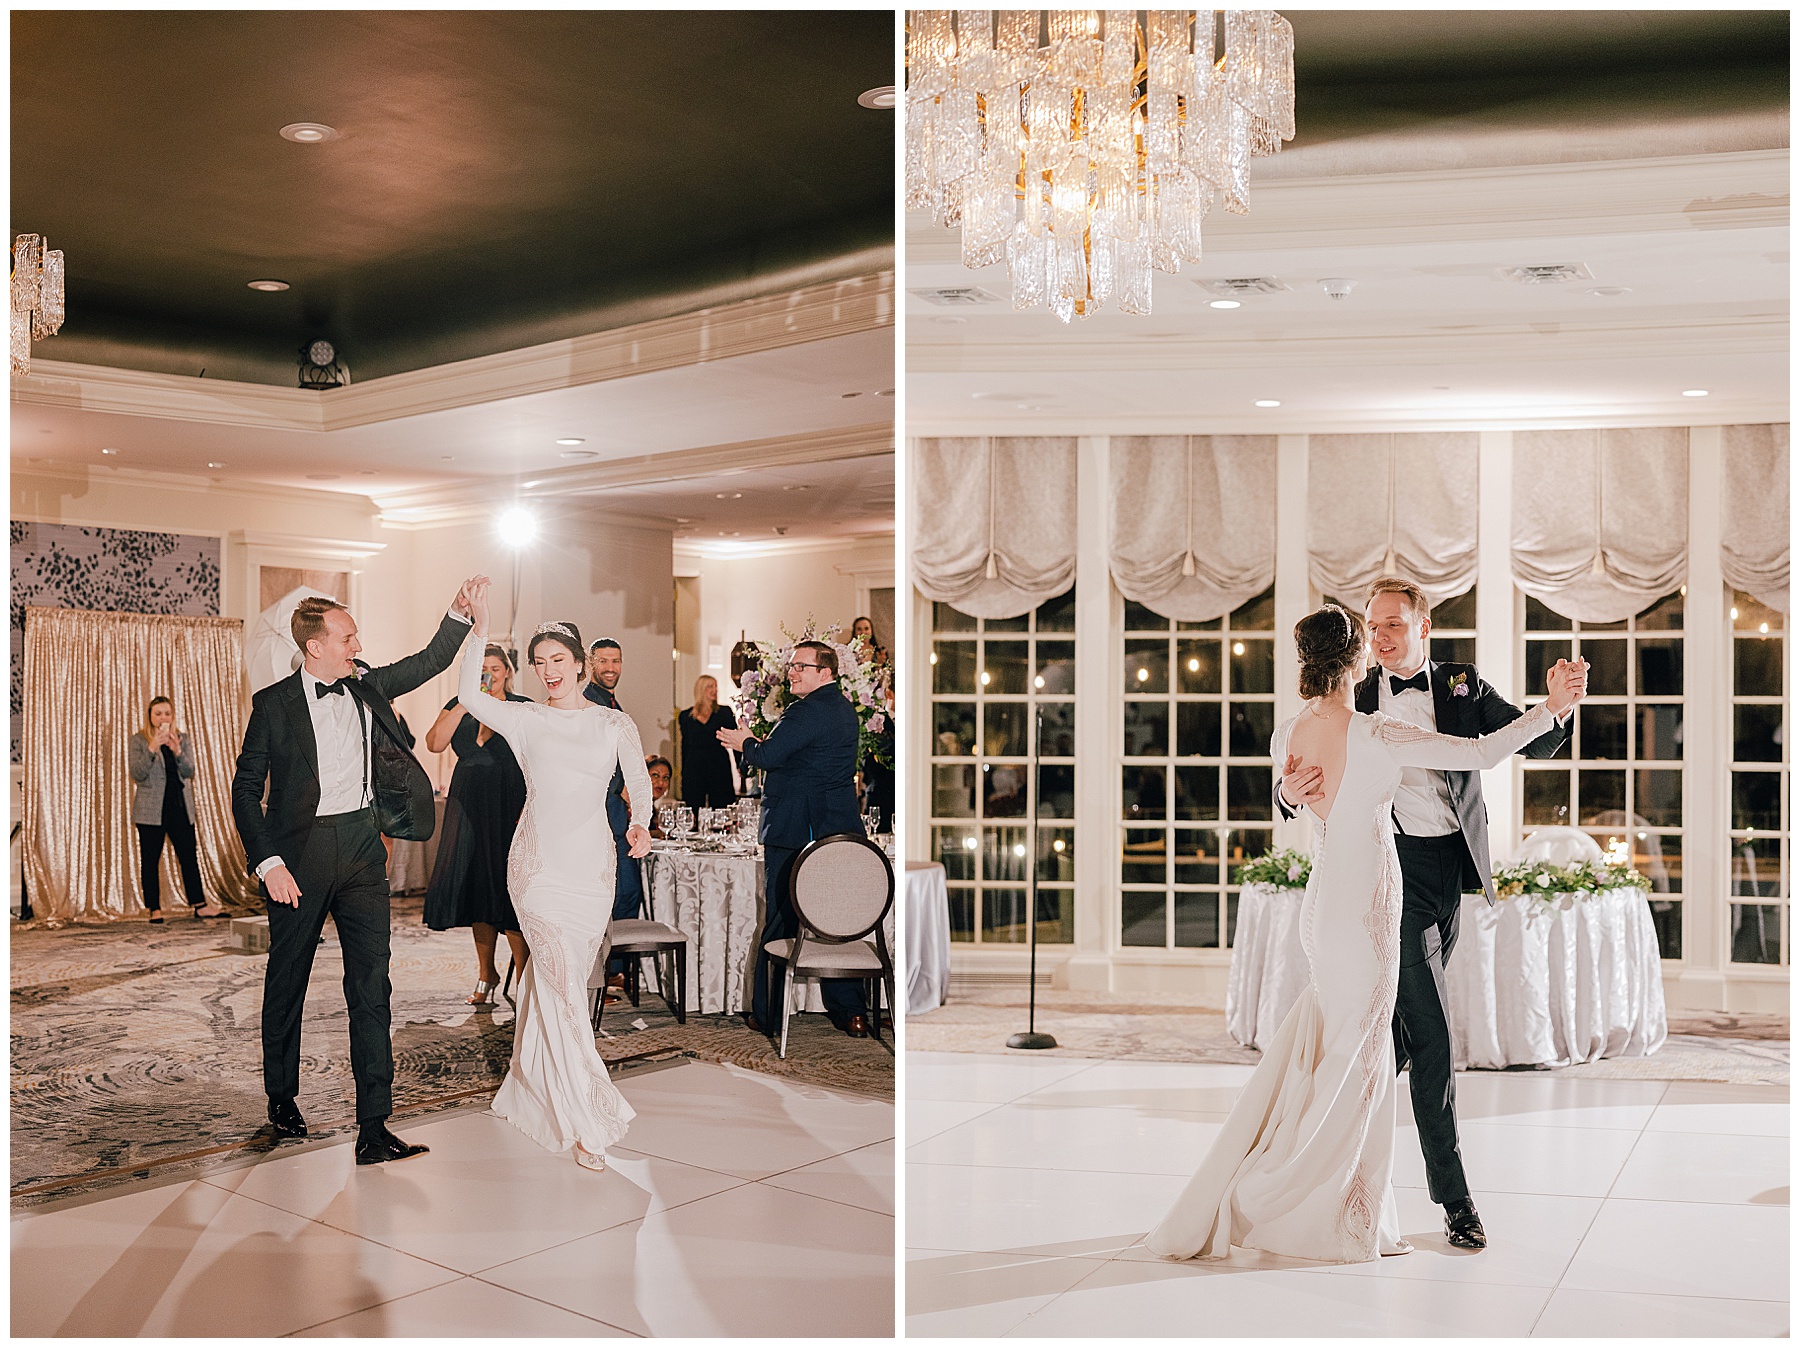 First Dance with the bride and groom in the Regency Room of the Williamsburg Inn Luke and Ashley Photography